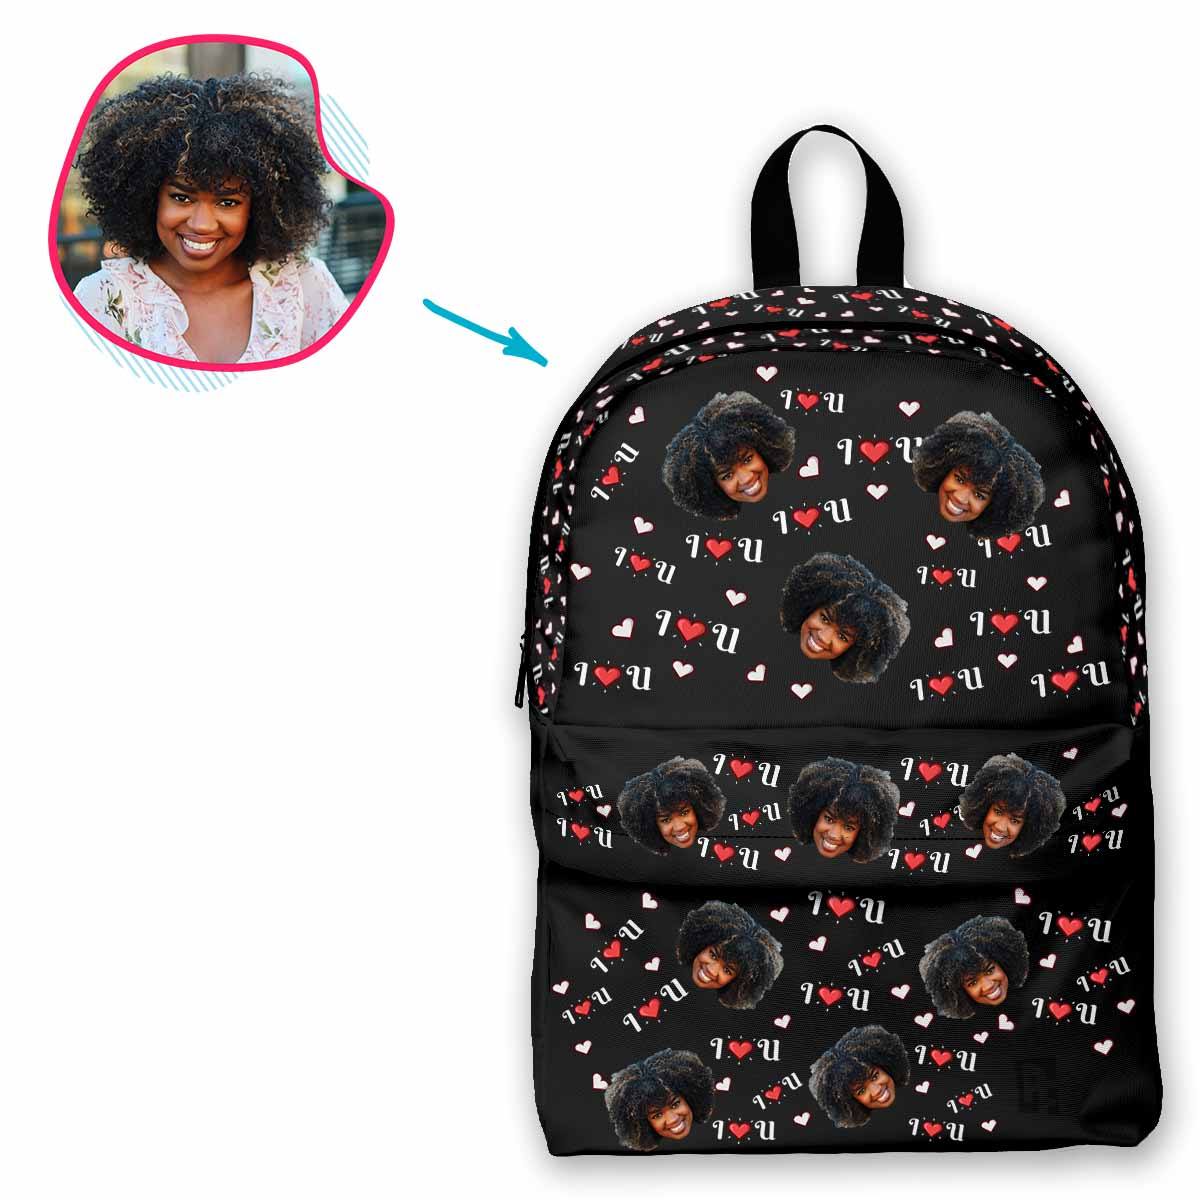 dark I <3 You classic backpack personalized with photo of face printed on it